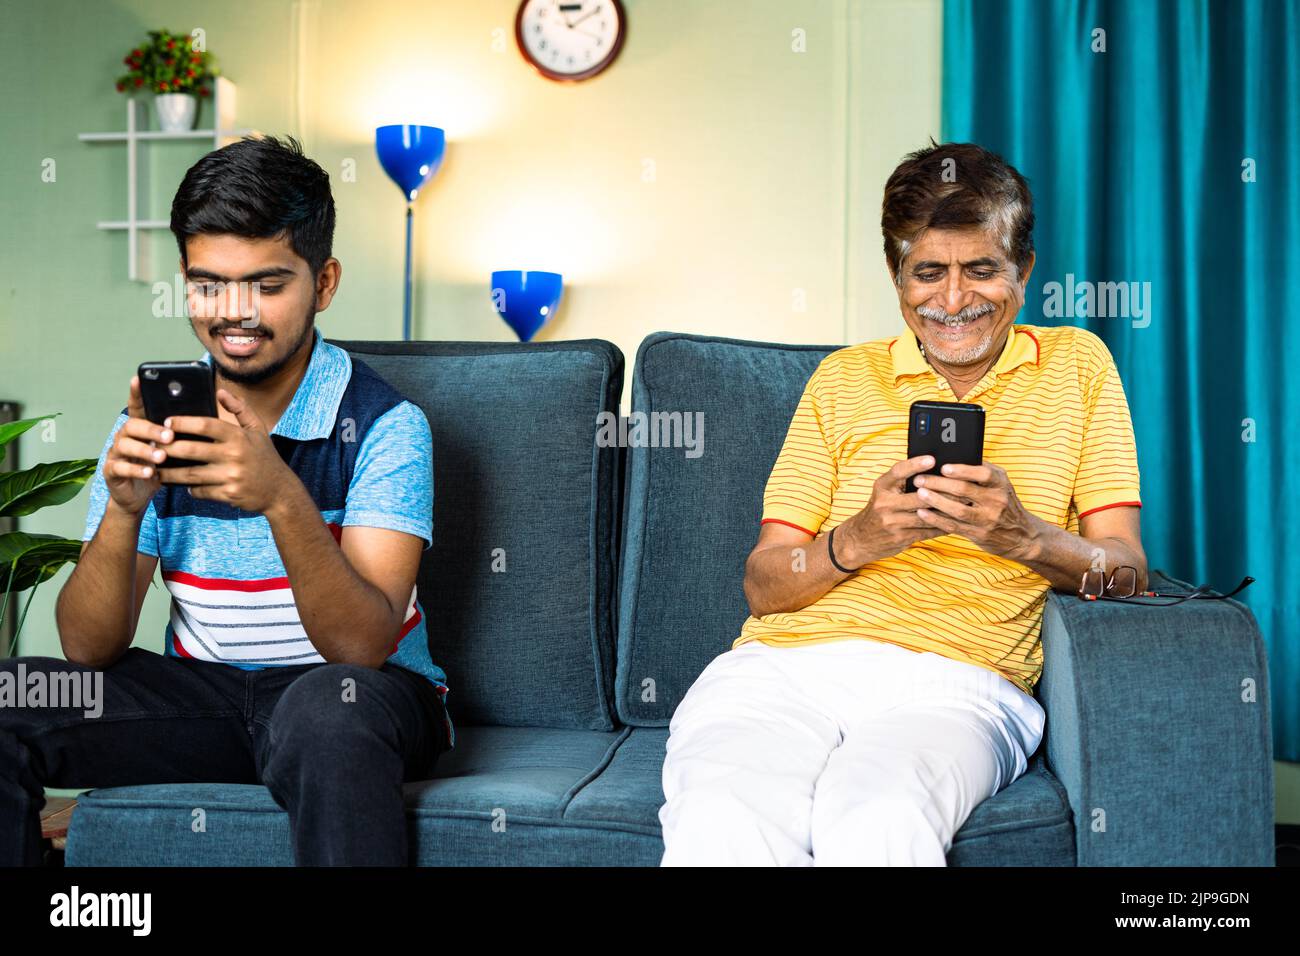 Focus on father, father and son busy using smartphone while sitting on sofa in distance at home - concept of Mobile phone addiction, digital Stock Photo